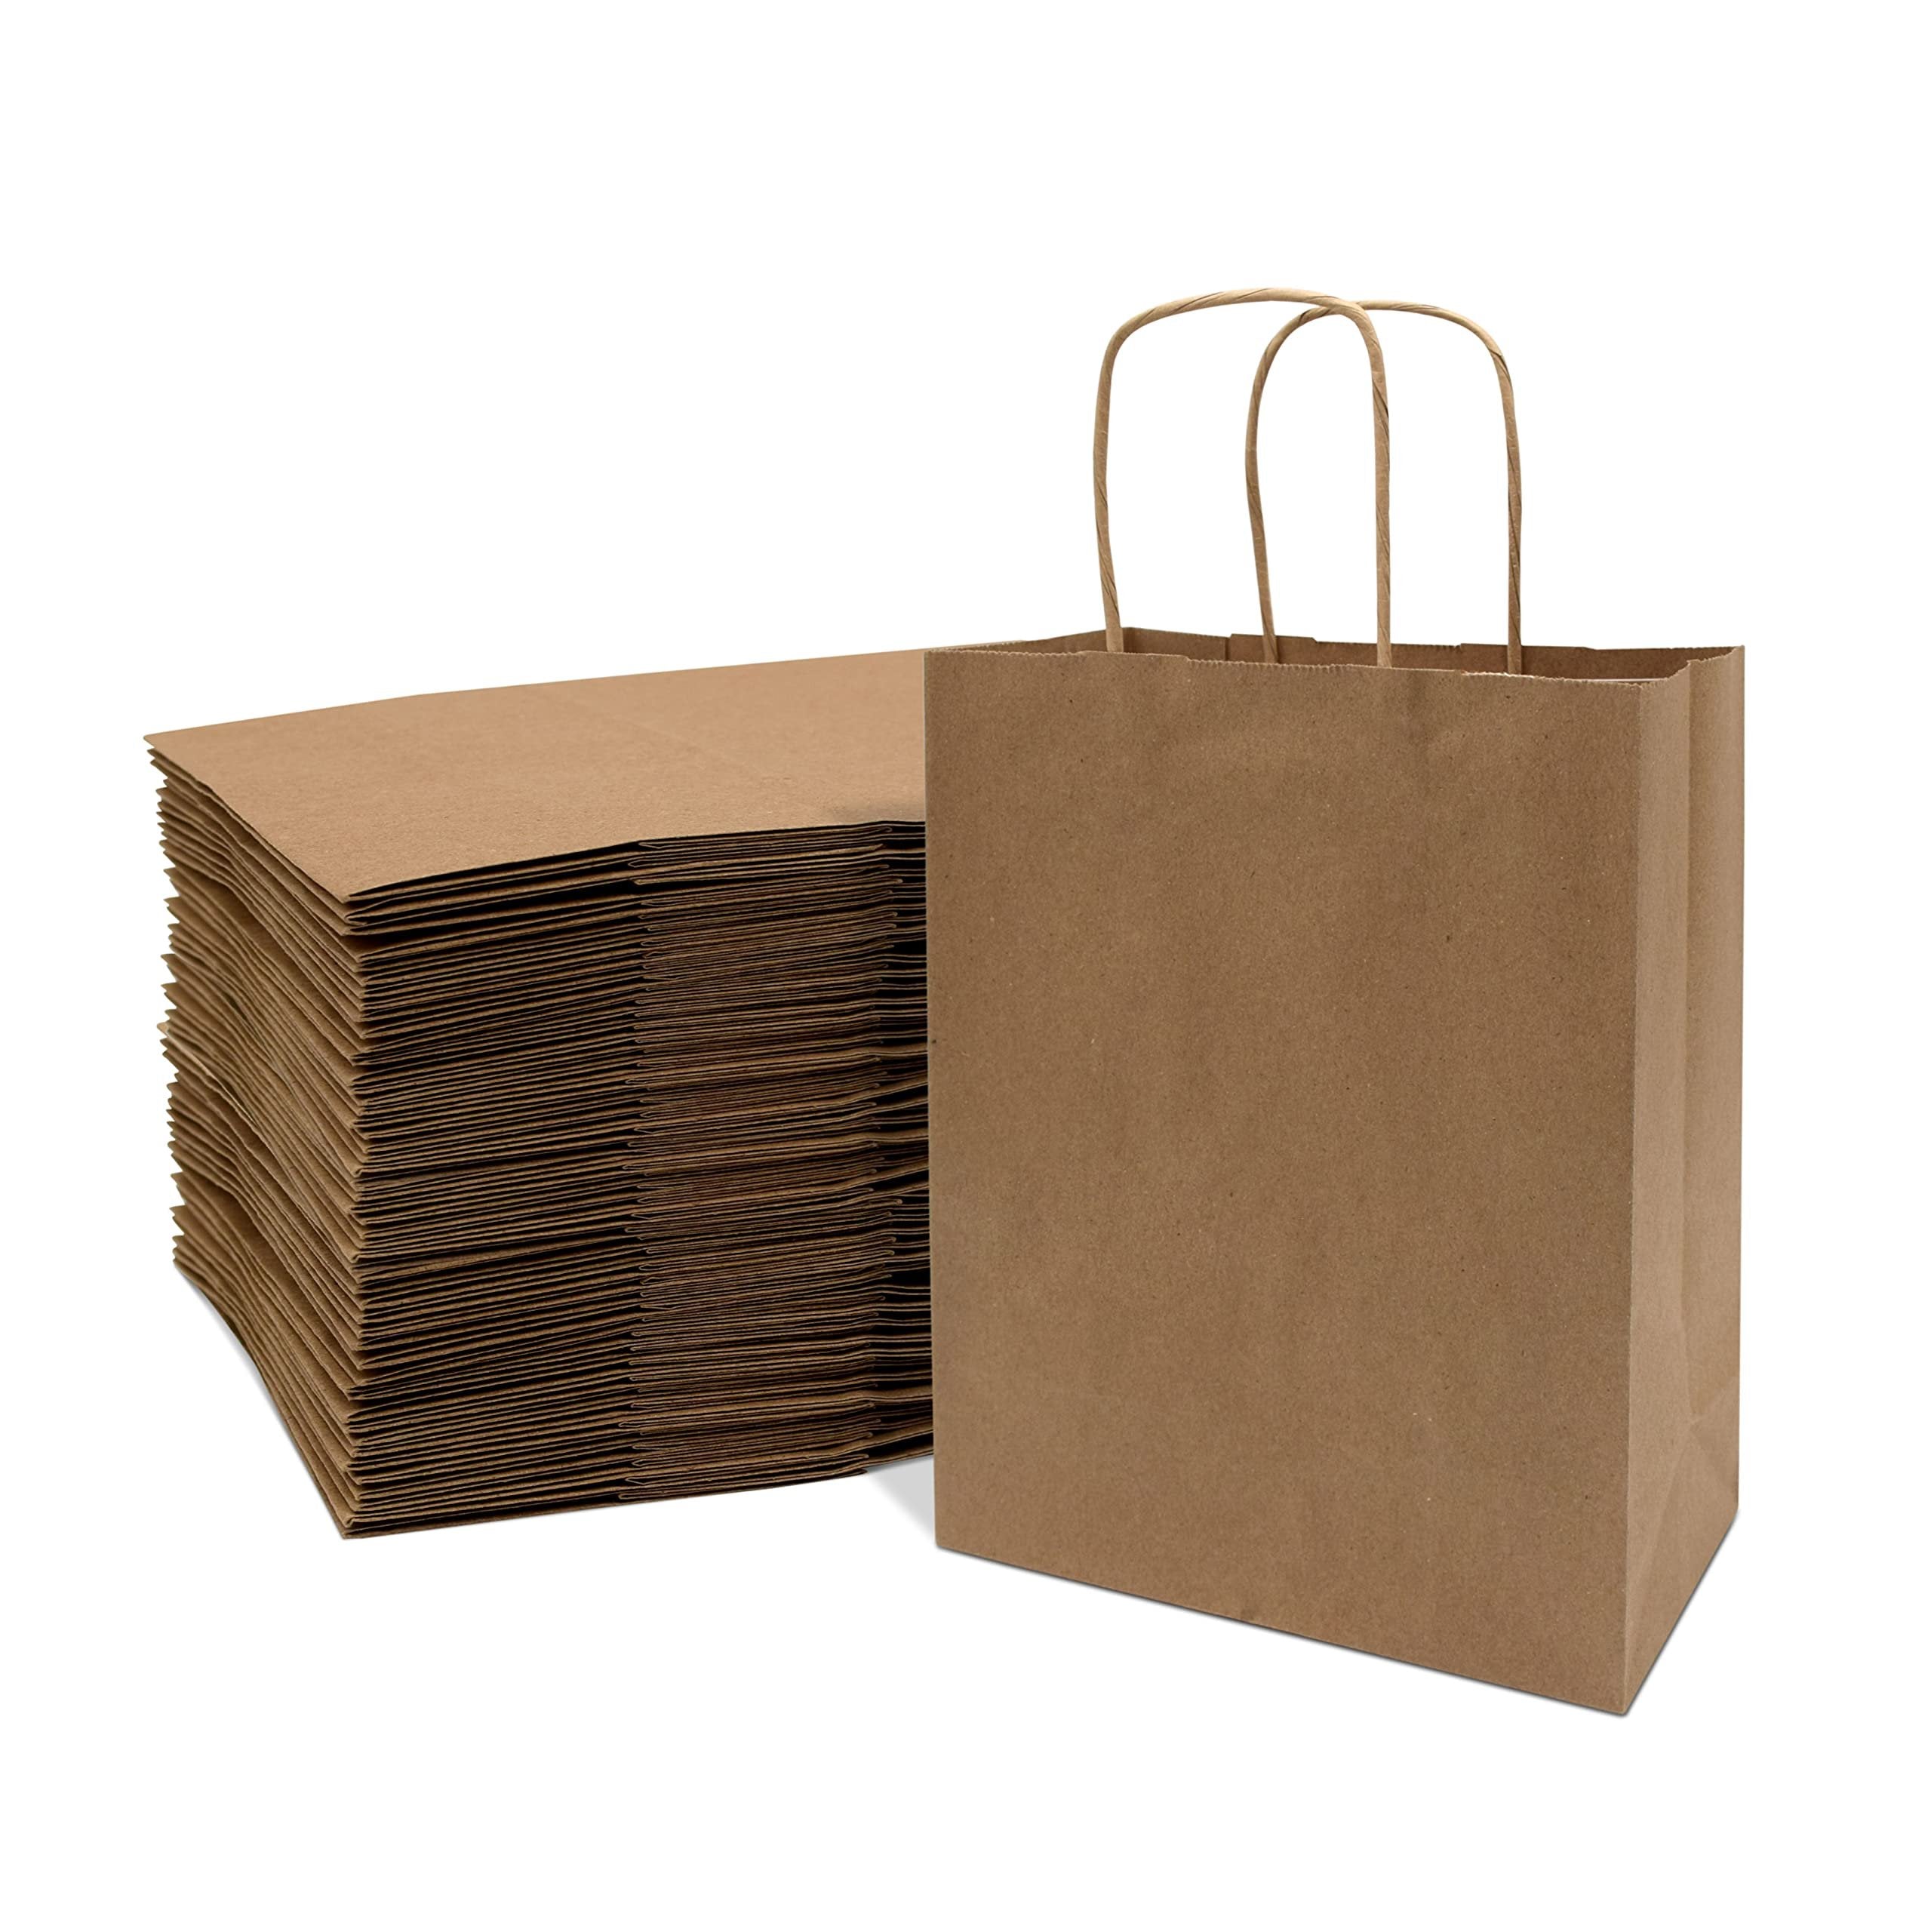 Brown Bags with Handles Bulk - 8x4x10 Inch 400 Pack Small Kraft Paper Shopping Bags, Craft Gift Totes in Bulk for Boutiques, Small Business, Retail Stores, Birthday Parties, Jewelry, Merchandise